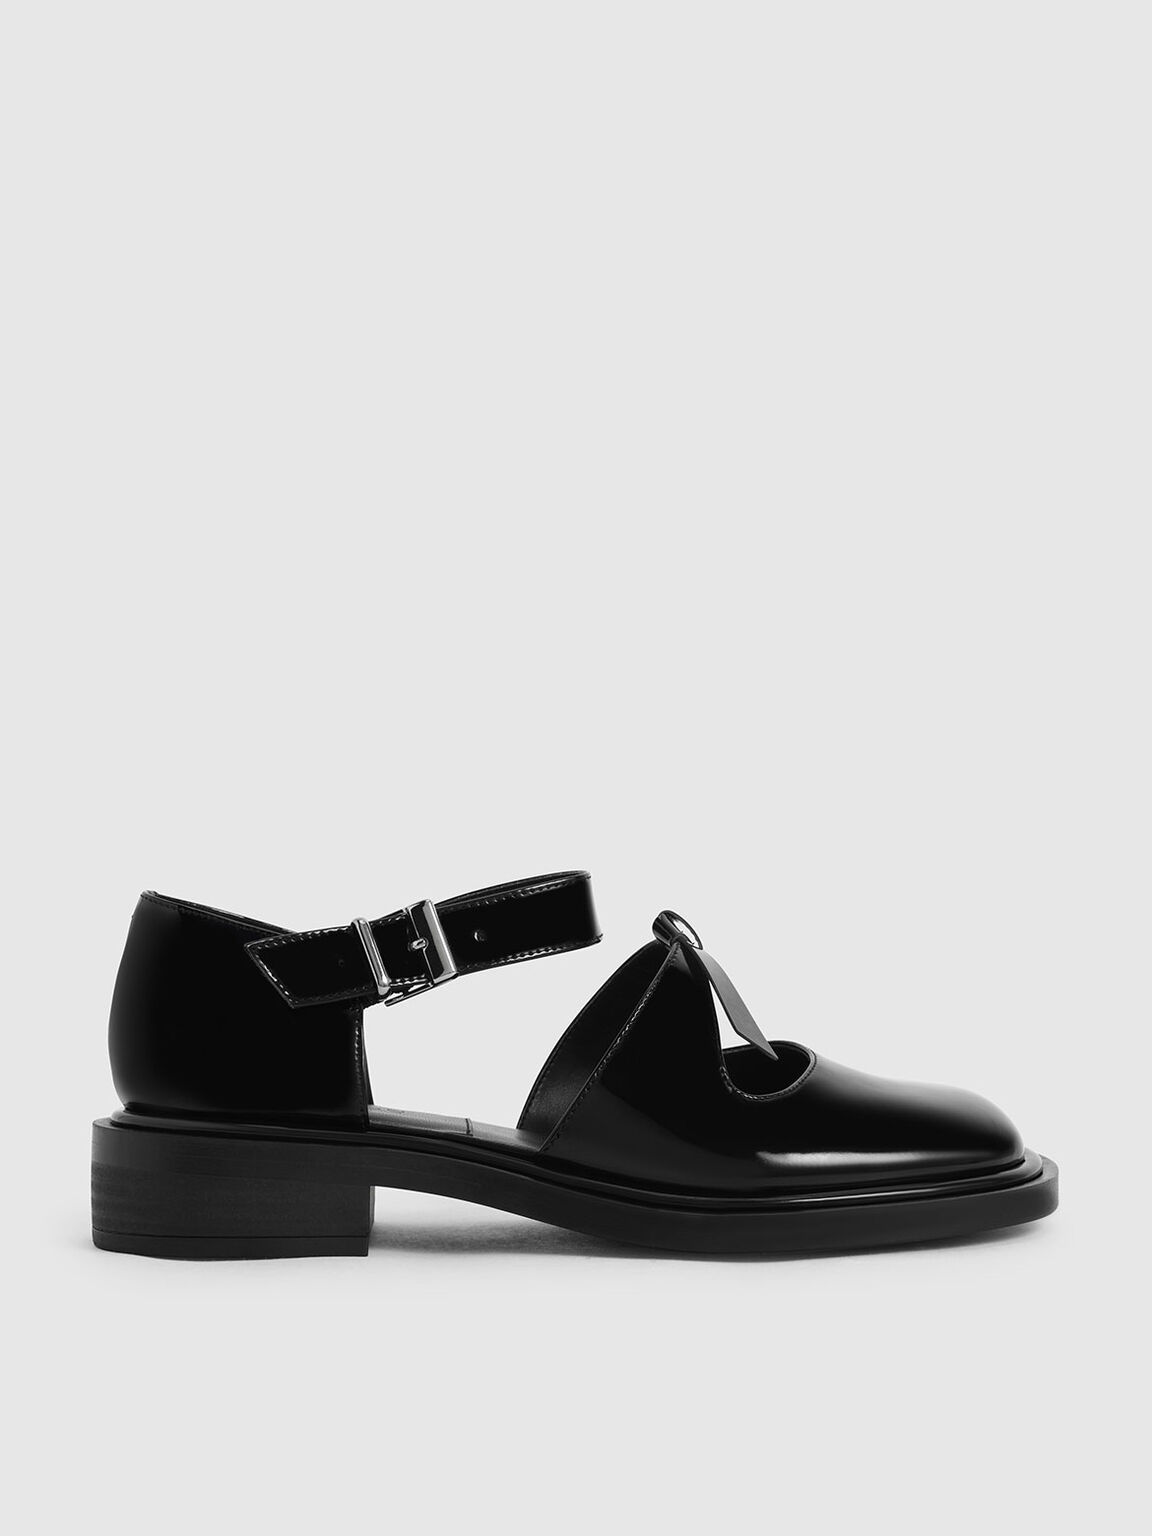 Rumi Patent Leather Bow-Tie Mary Jane Flats, Black, hi-res